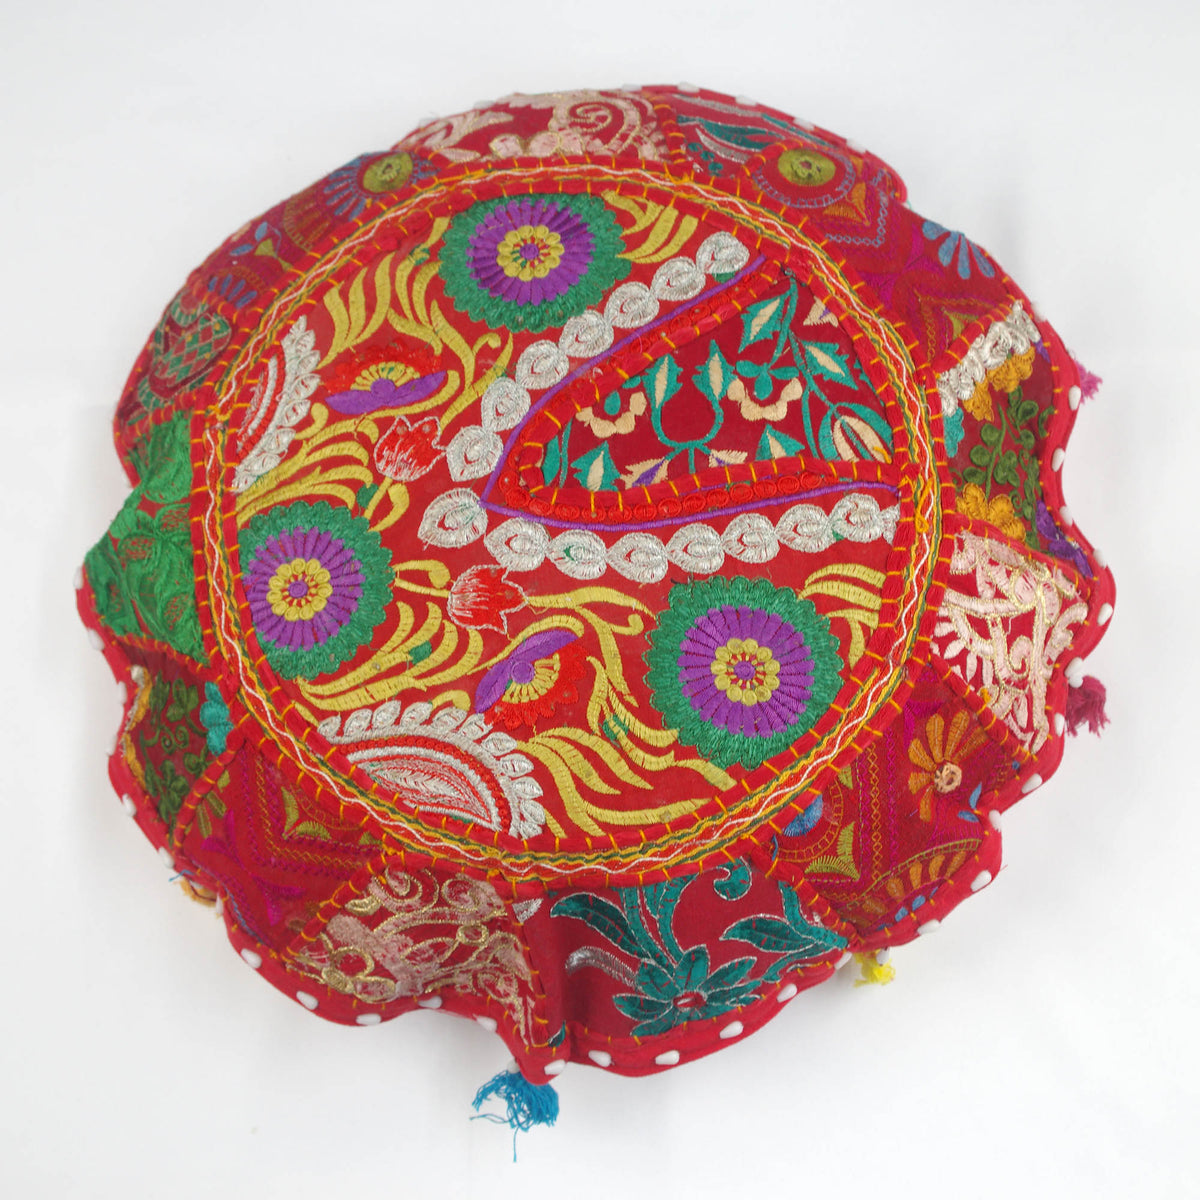 Red Floral Round Floor Embroidered Patchwork Pouf Ottoman Indian Vintage Cushion Cover 18"